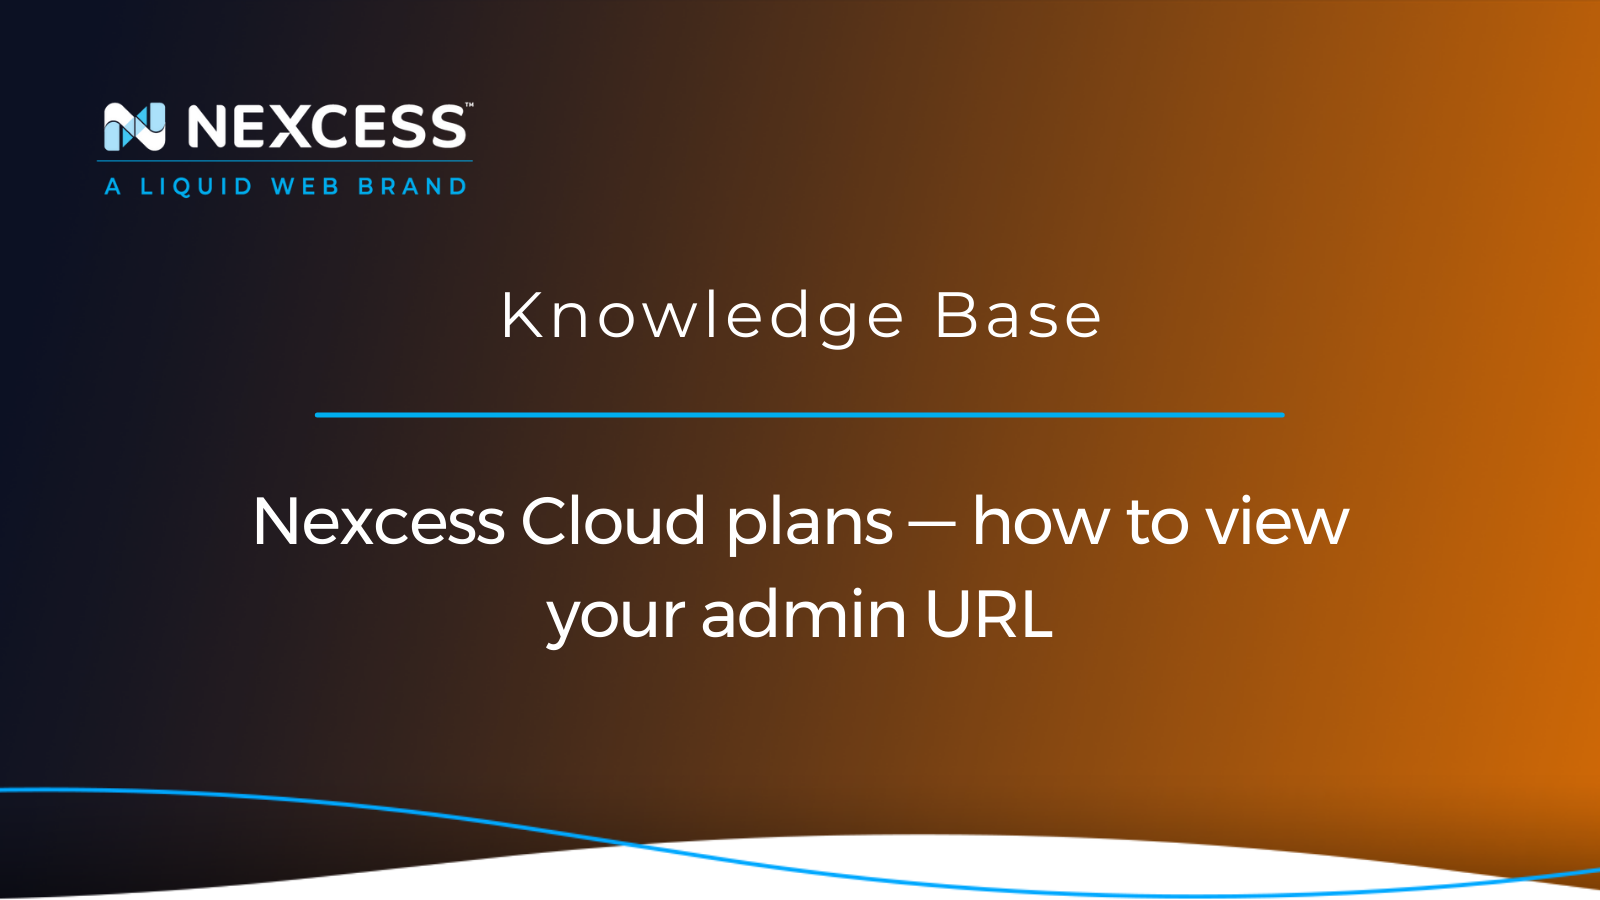 Nexcess Cloud plans — how to view your admin URL